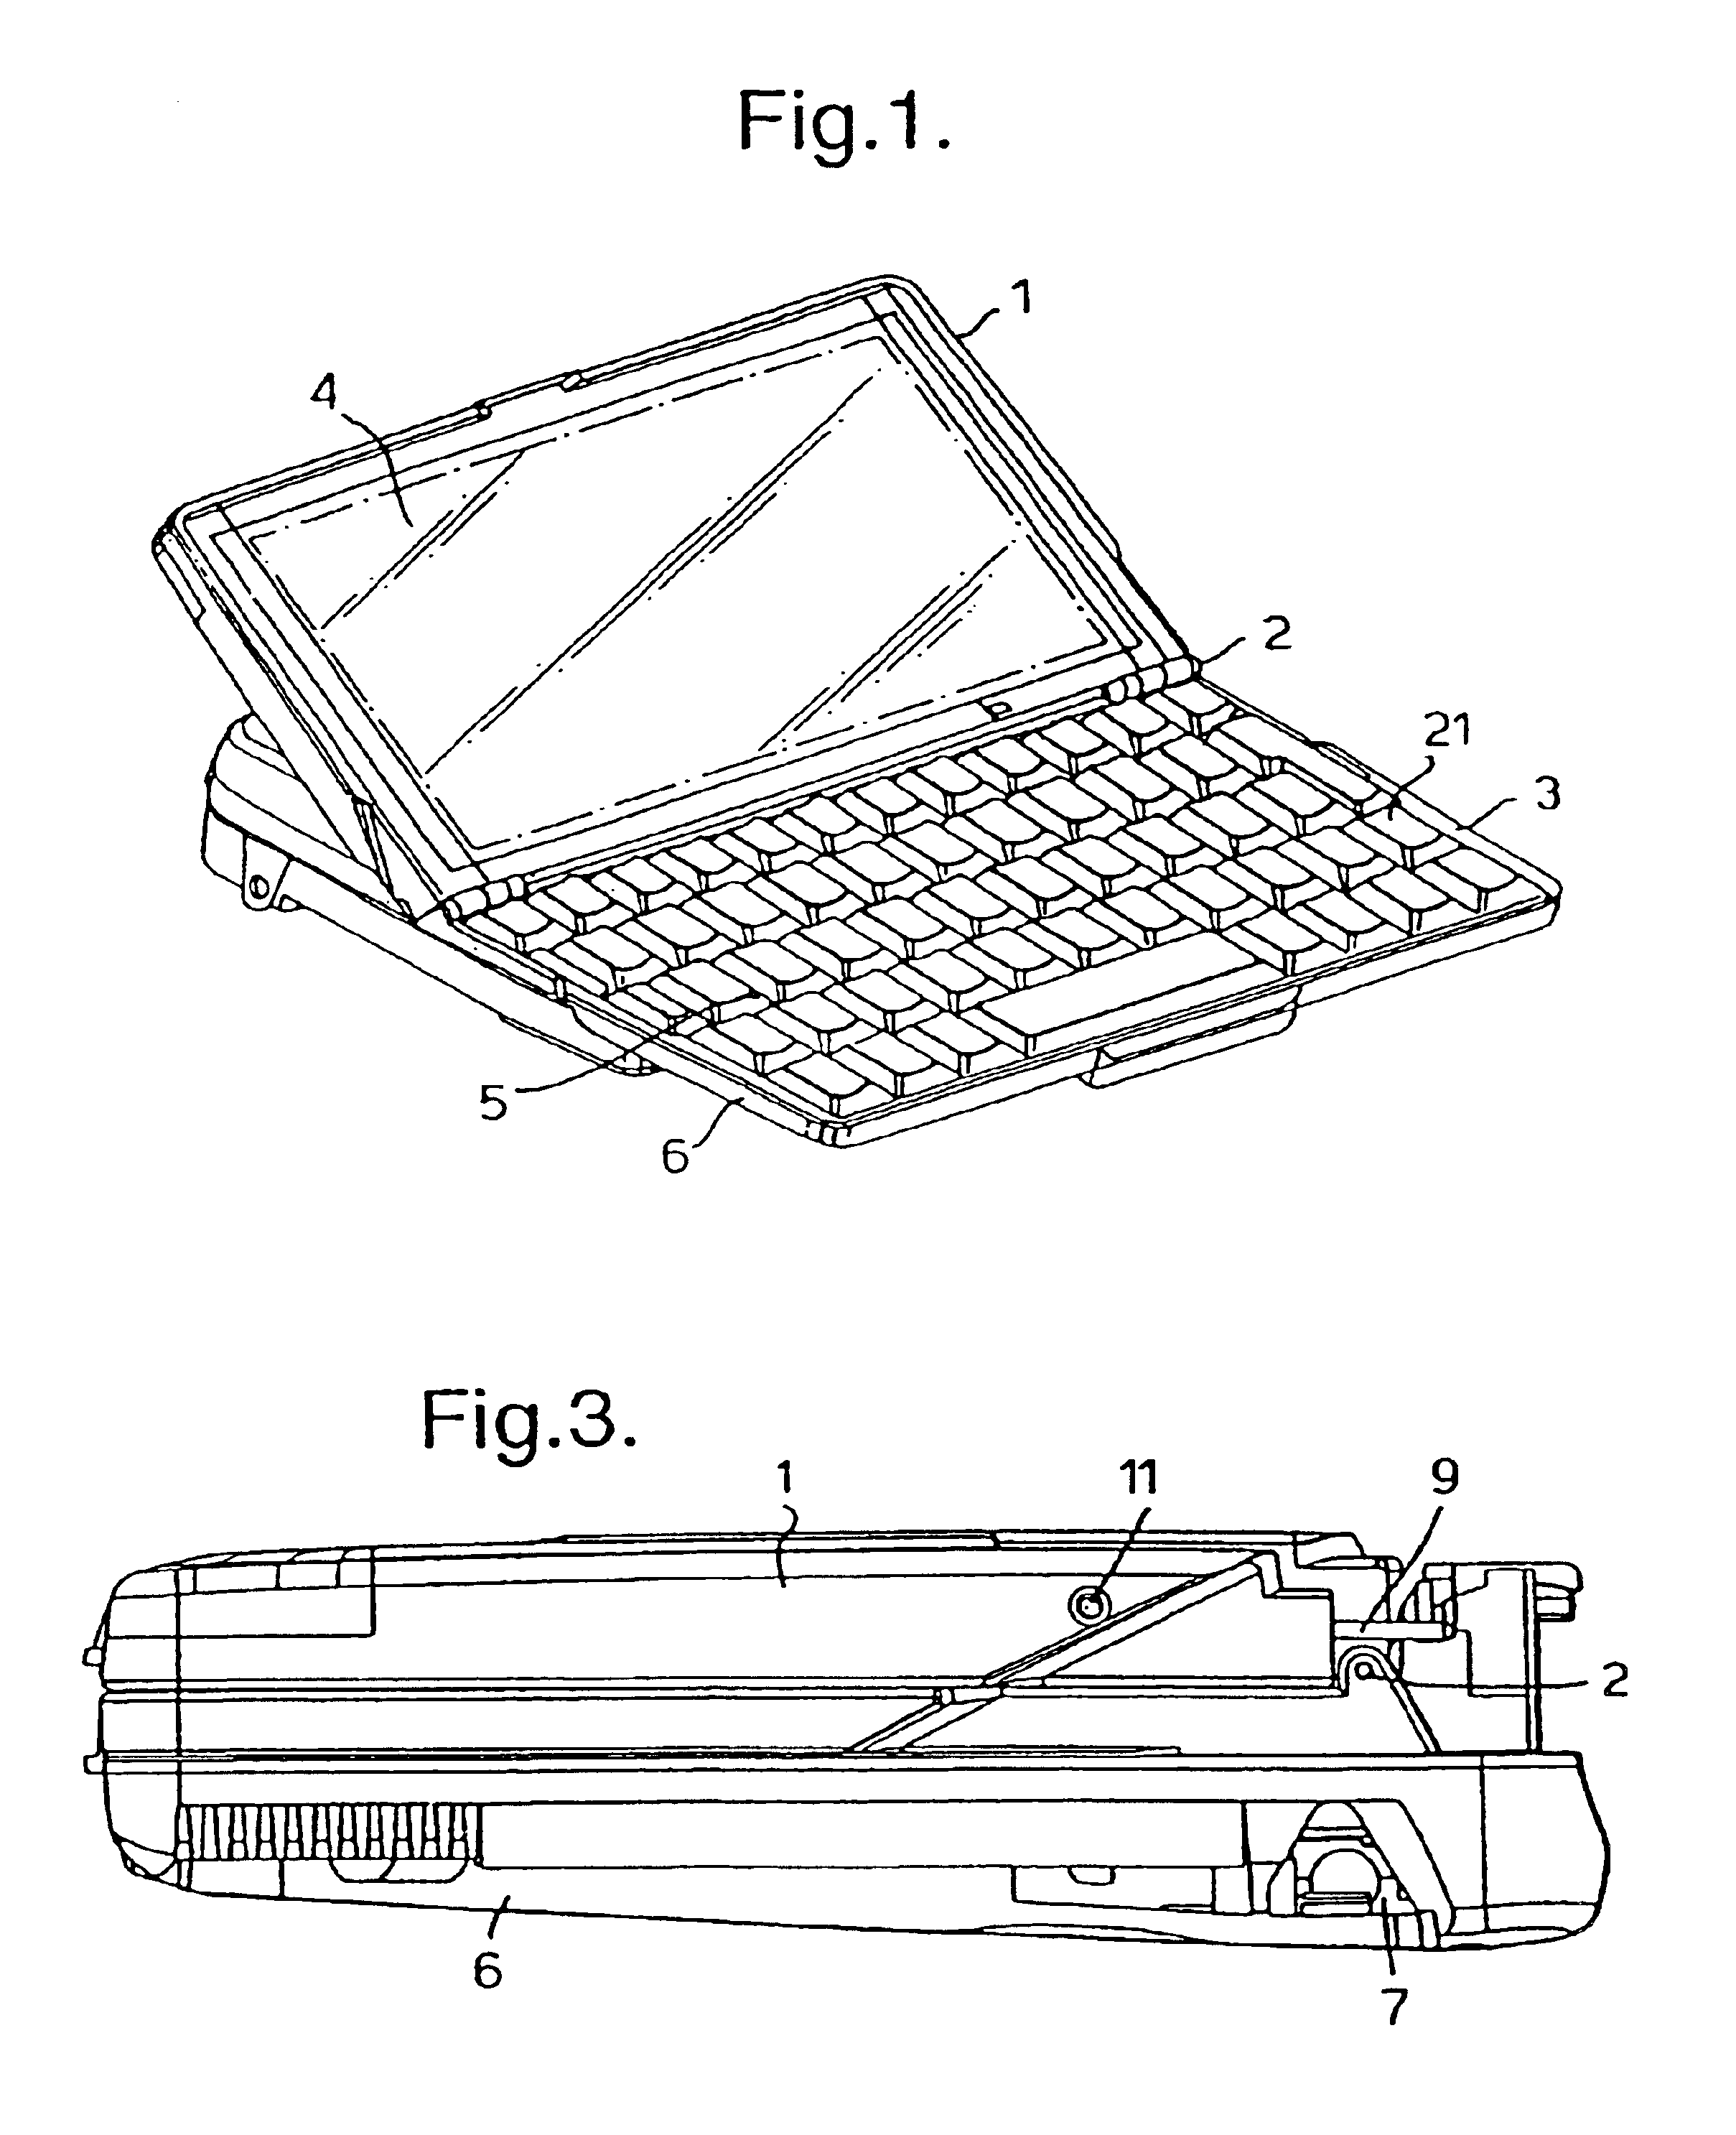 Computer with a pen or touch sensitive display